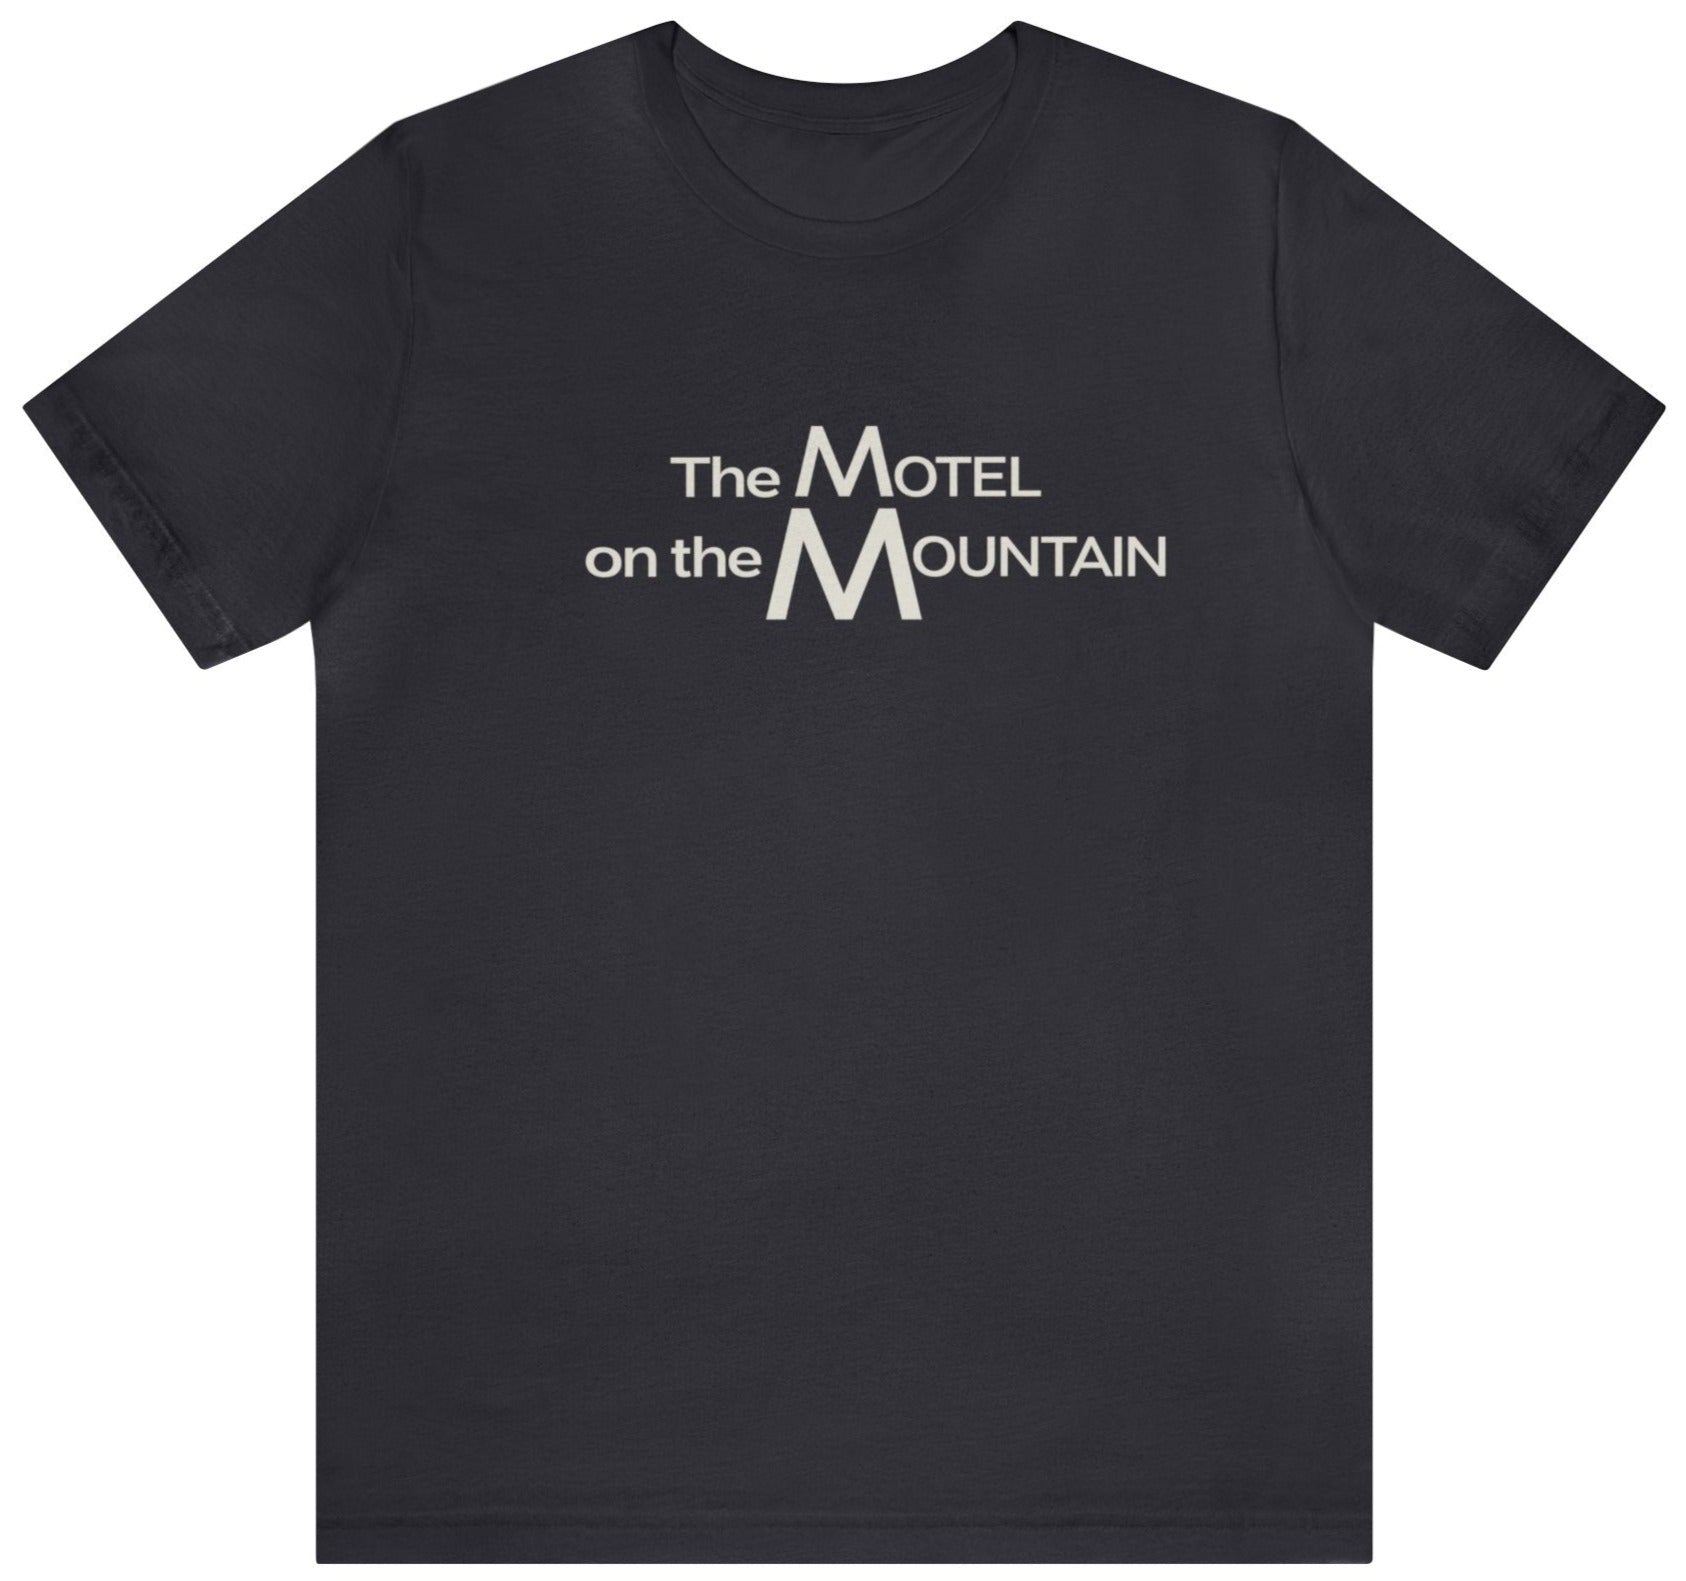 Motel on the Mountain t shirt